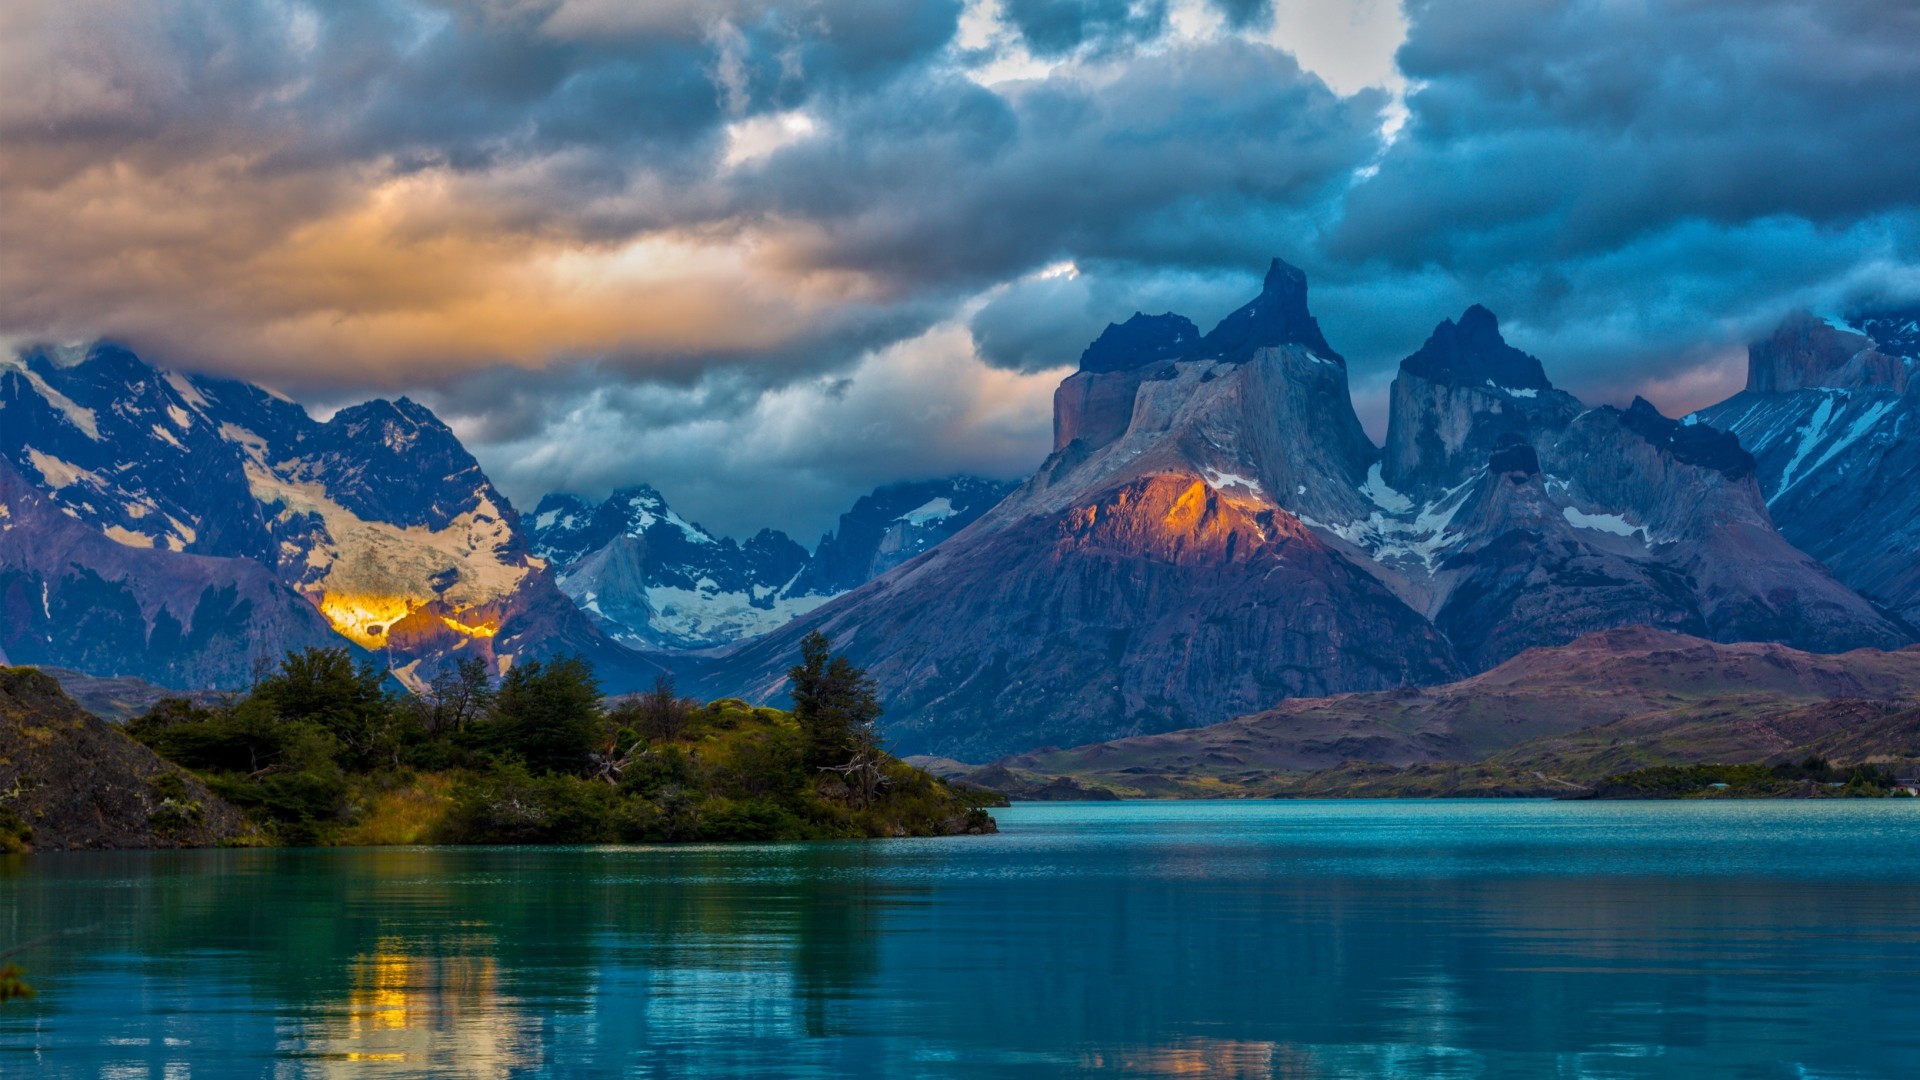 Preview wallpaper landscape, argentina, mountain, lake, patagonia, clouds,  nature 1920×1080